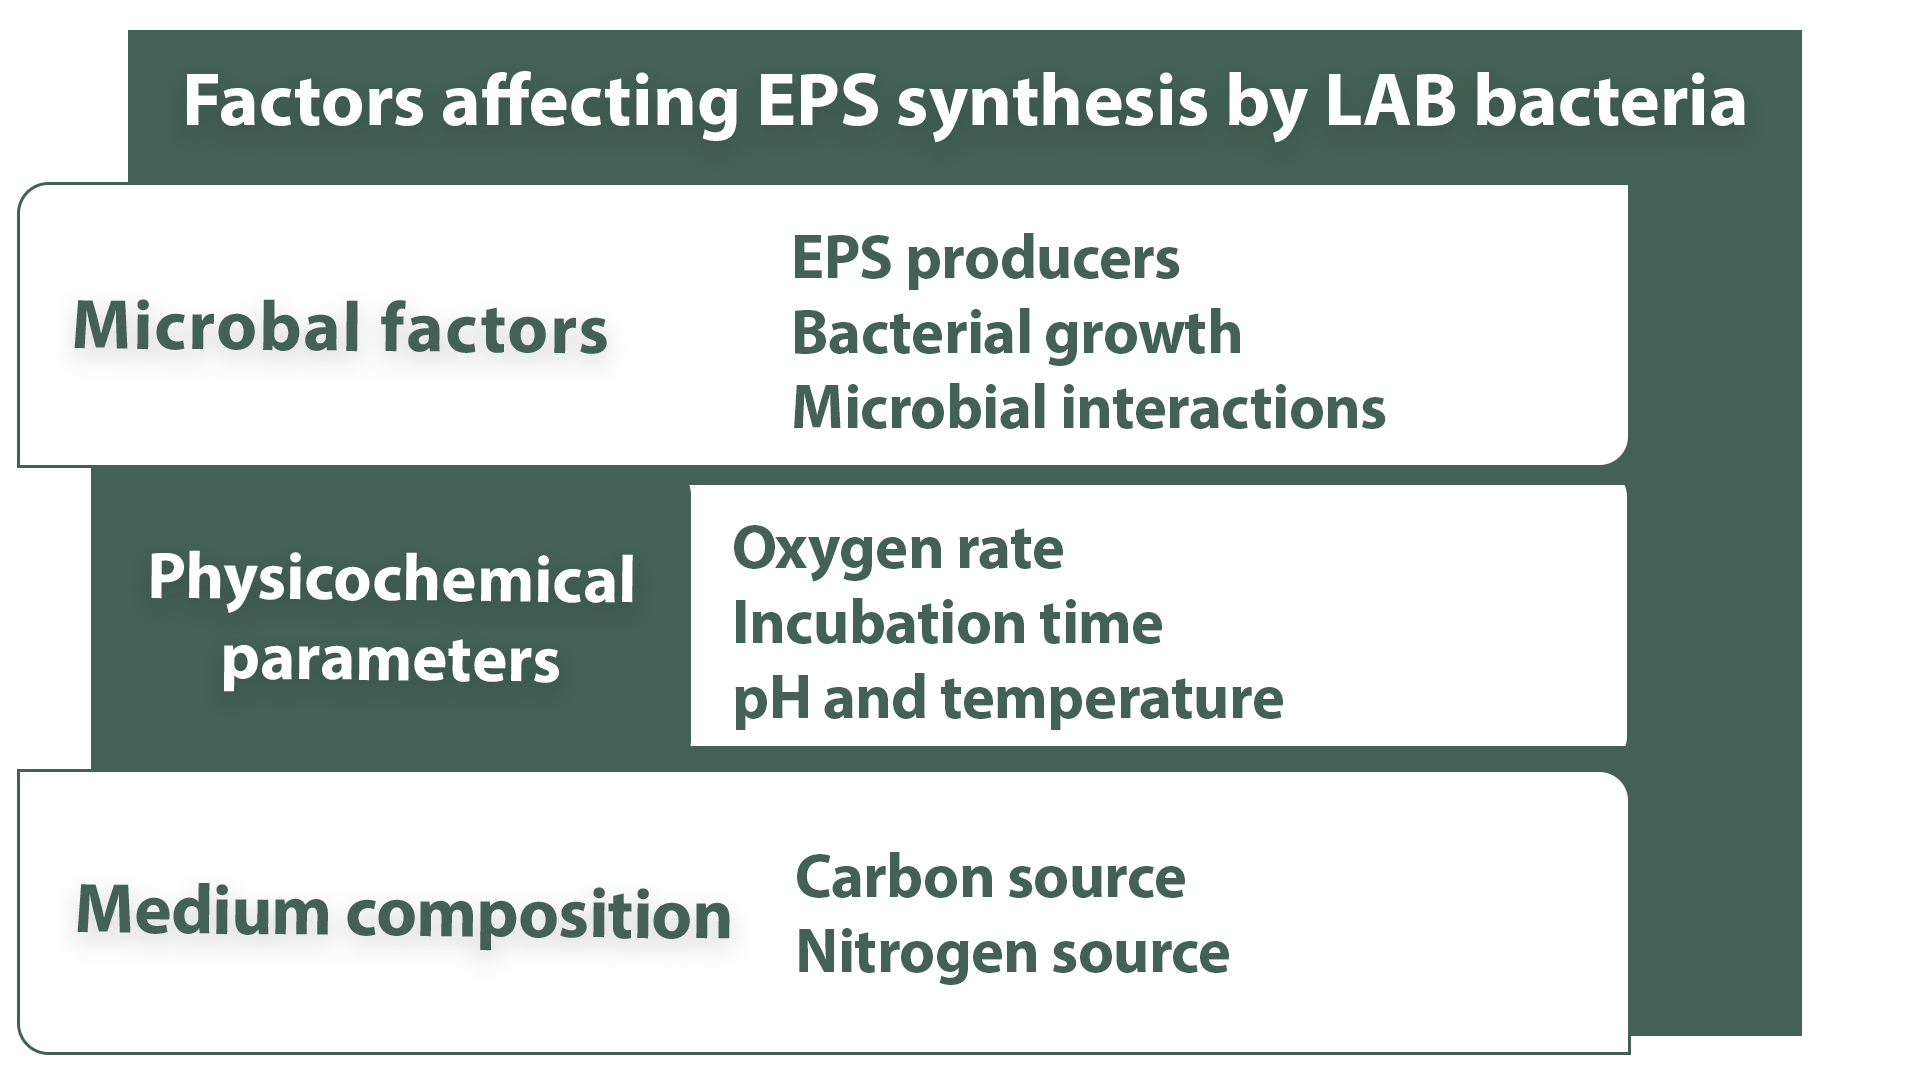 Factors affecting EPS production by LAB strains